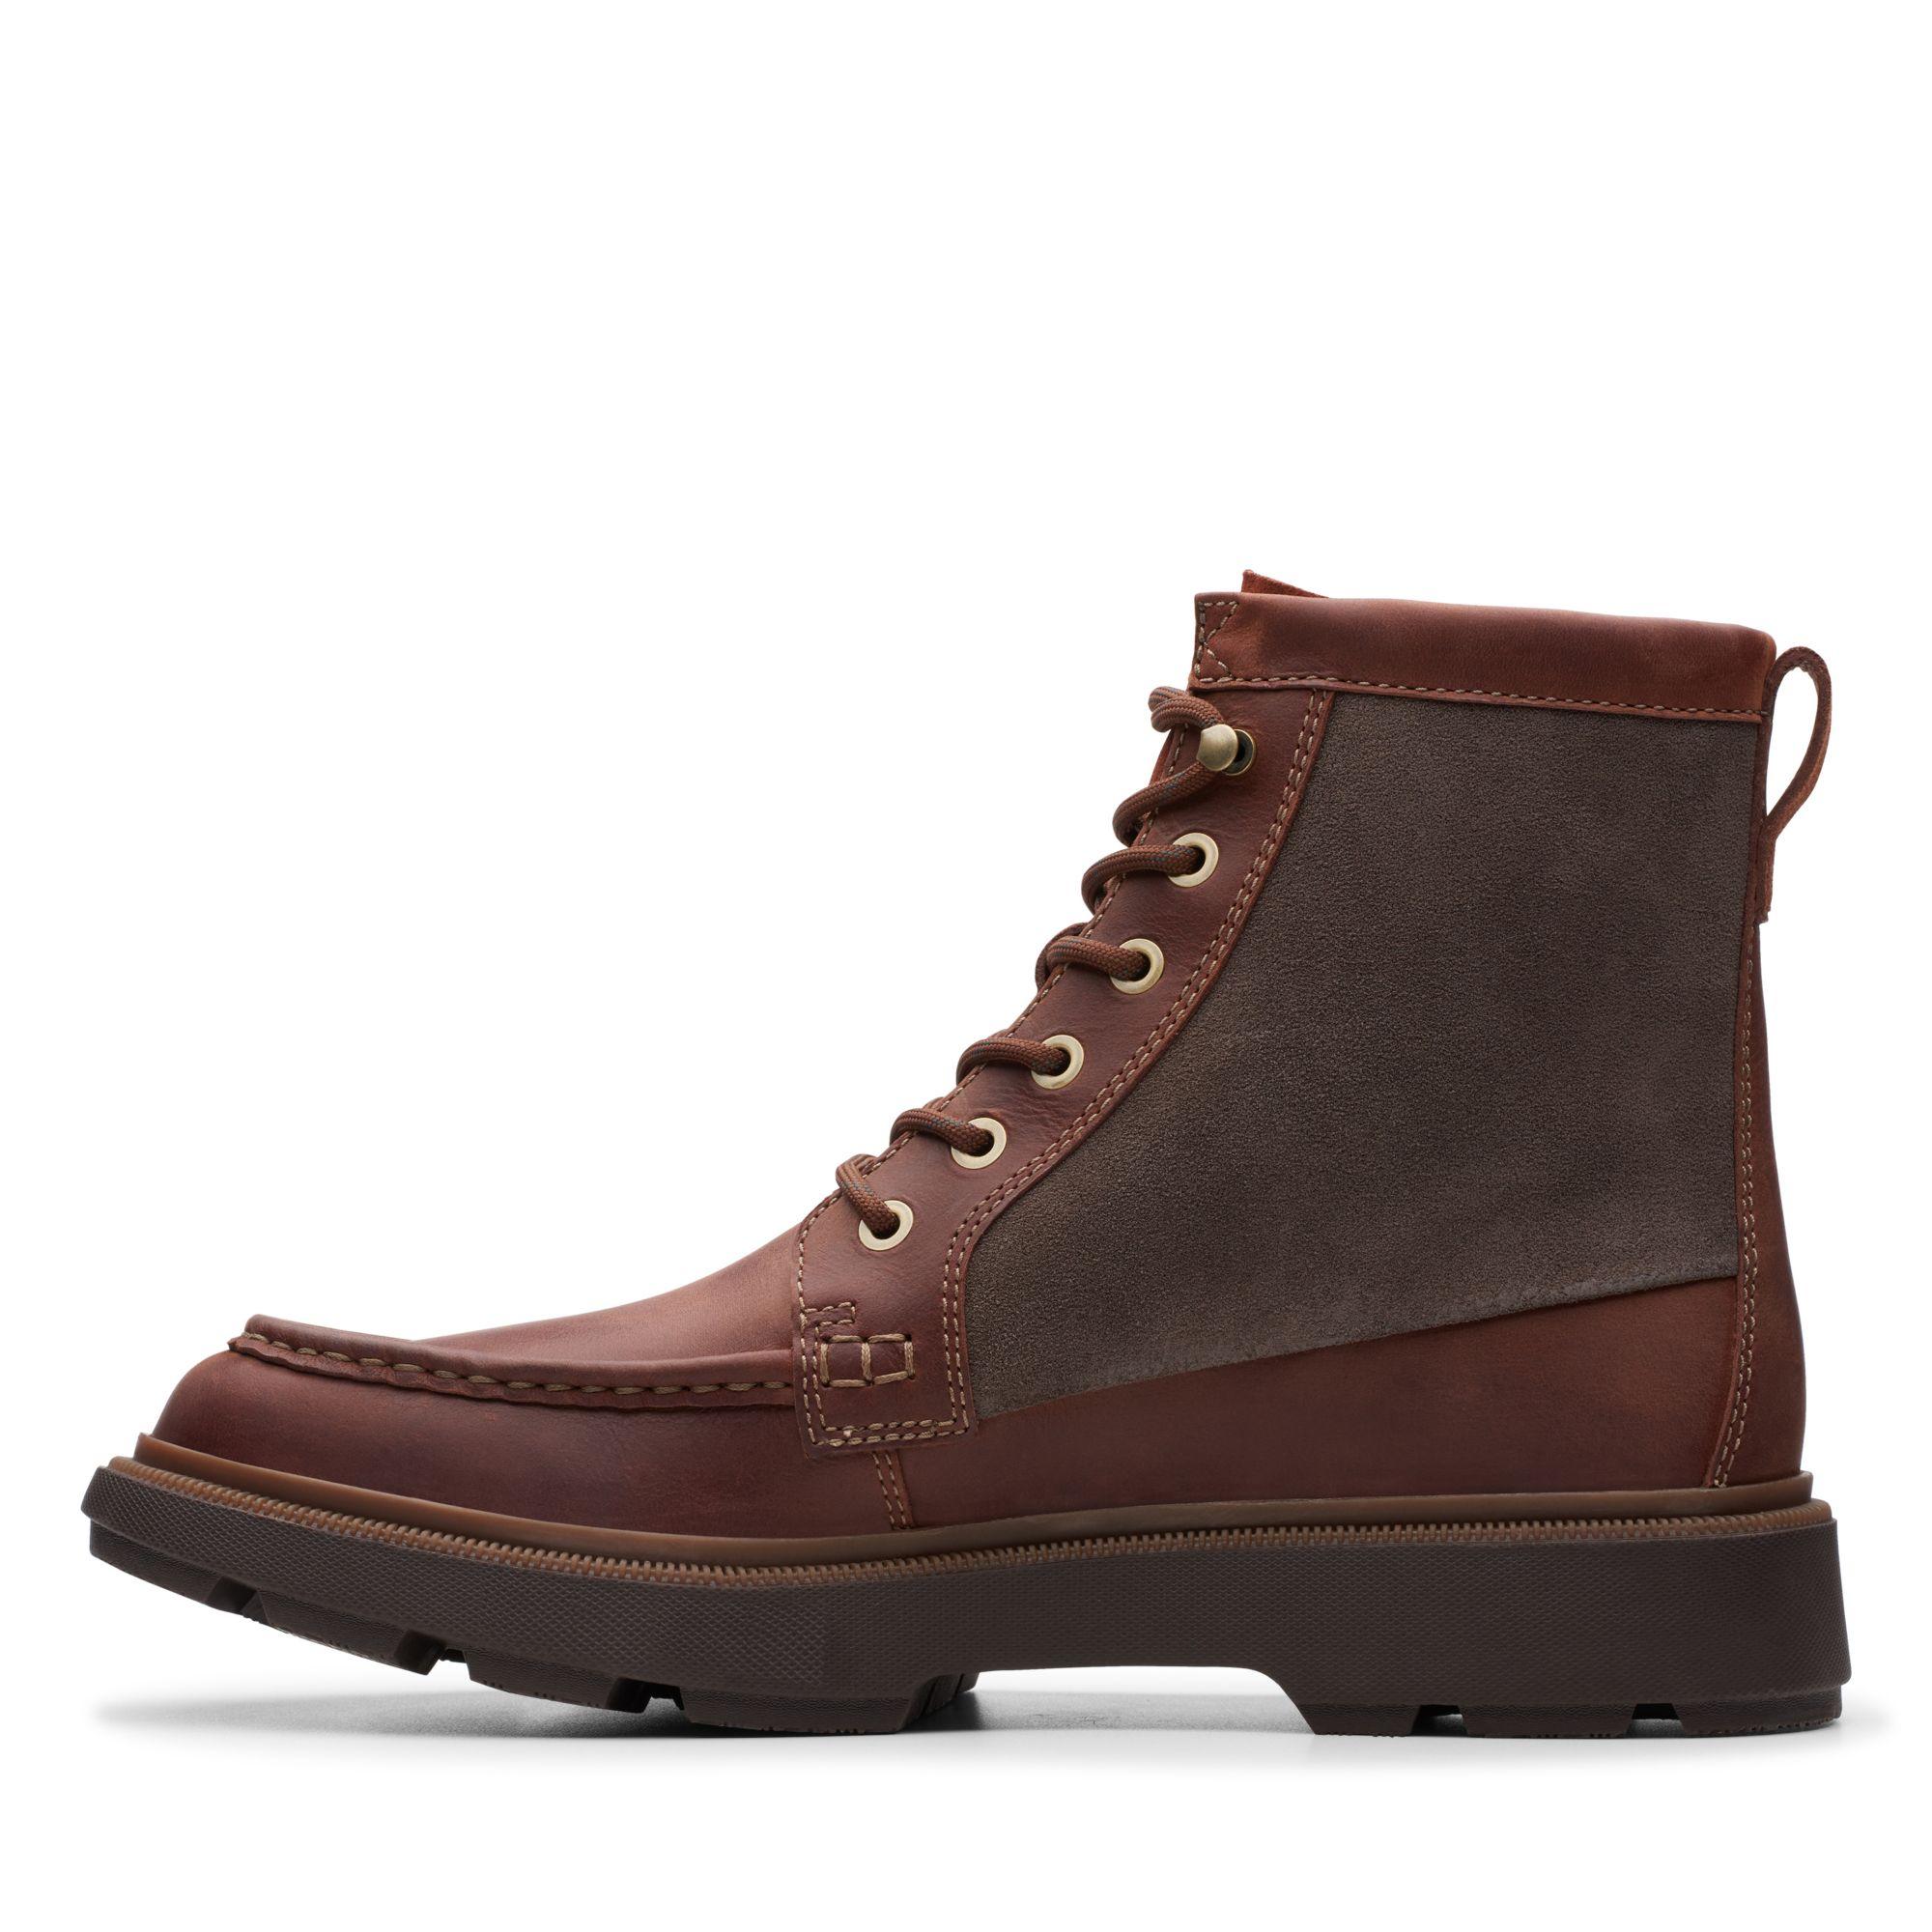 Clarks Leather Dempsey Peak in Mahogany Leather (Brown) for Men - Lyst